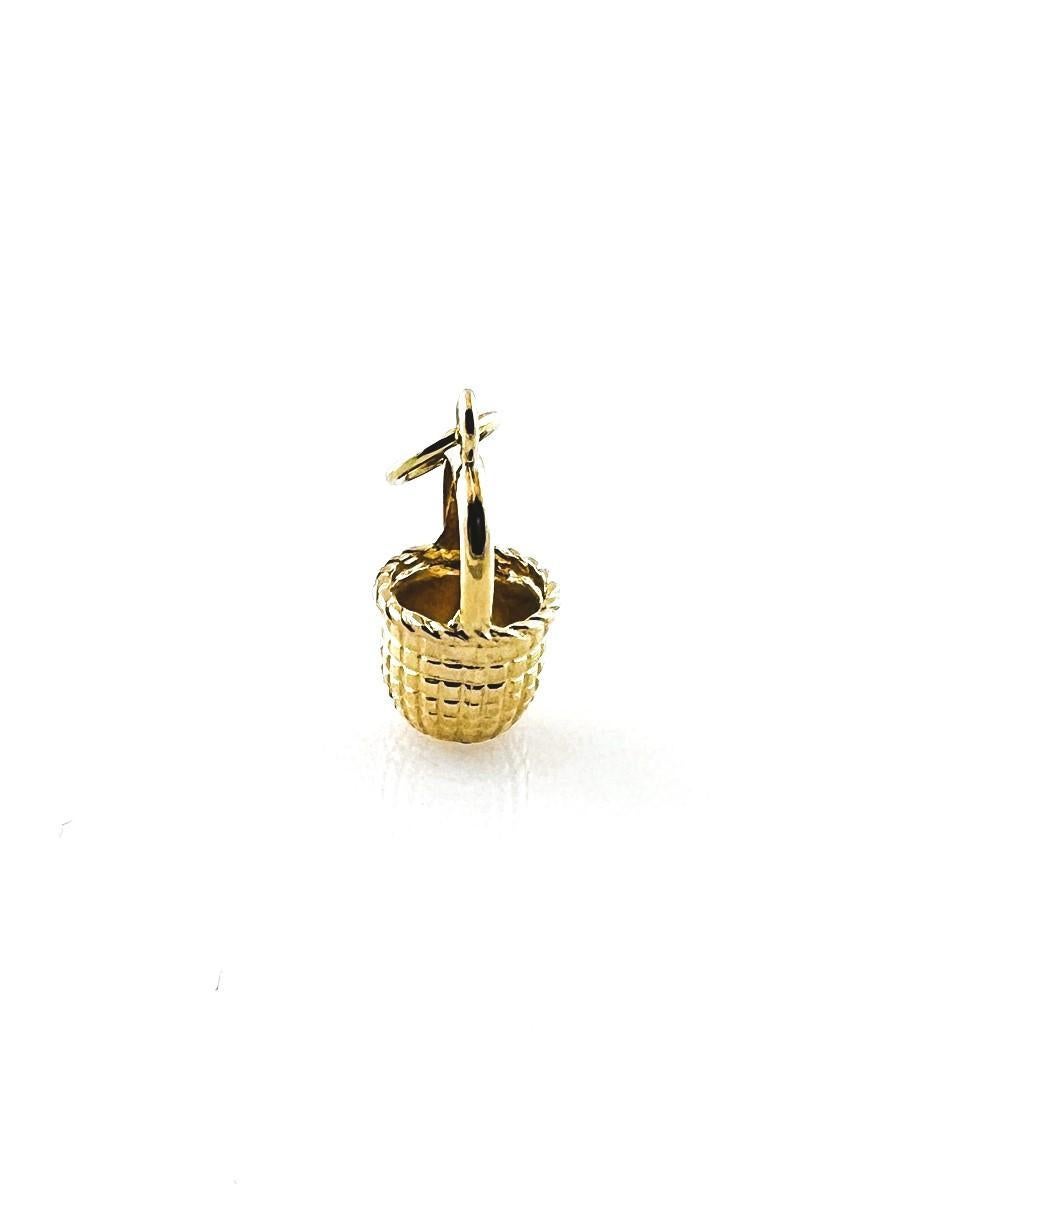 14K Yellow Gold Basket Charm

This basket charm is set in 14K yellow gold

Charm measures approx.  17.0 x 9.4 x 7.4 mm

1.8 grams / 1.1 dwt

Acid Tested for 14K

Very good preowned condition. 

Will be shipped priority mail with insurance in a gift